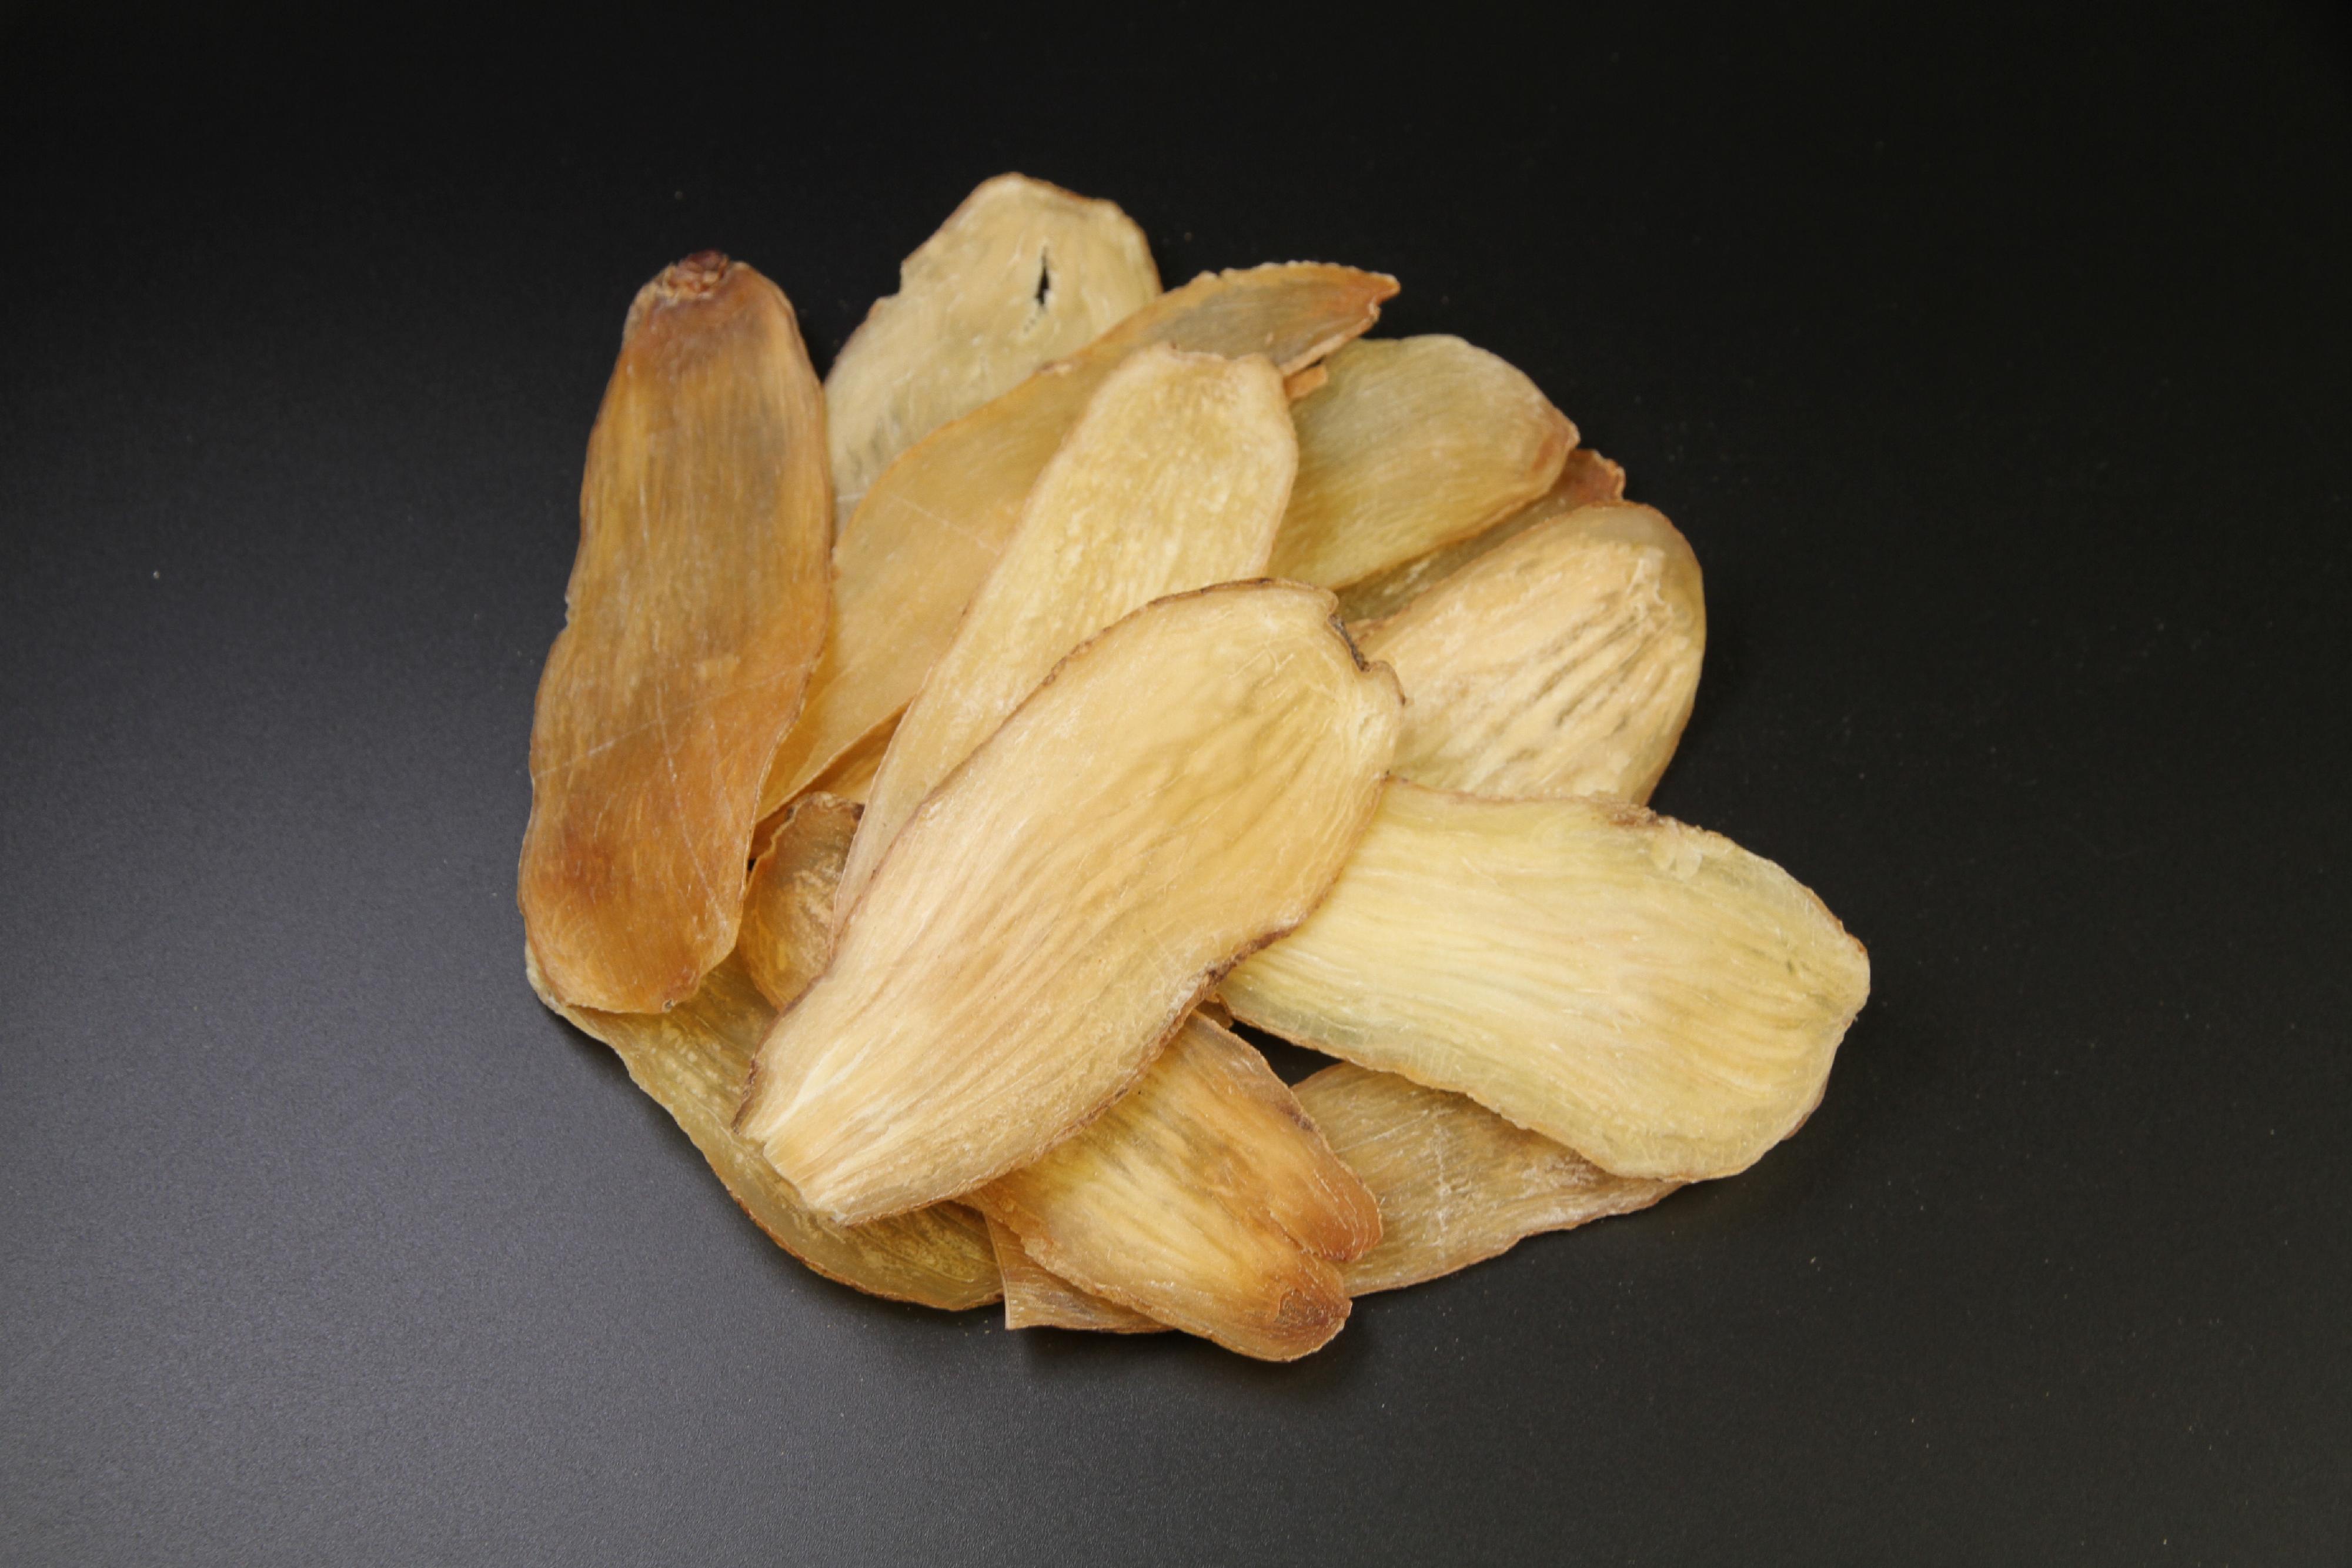 A Government spokesman today (February 1) reminded members of the public not to bring endangered species into Hong Kong without a required licence and not to import regulated food illegally when returning from visits to other places. Photo shows gastrodia which is regulated under the Protection of Endangered Species of Animals and Plants Ordinance.